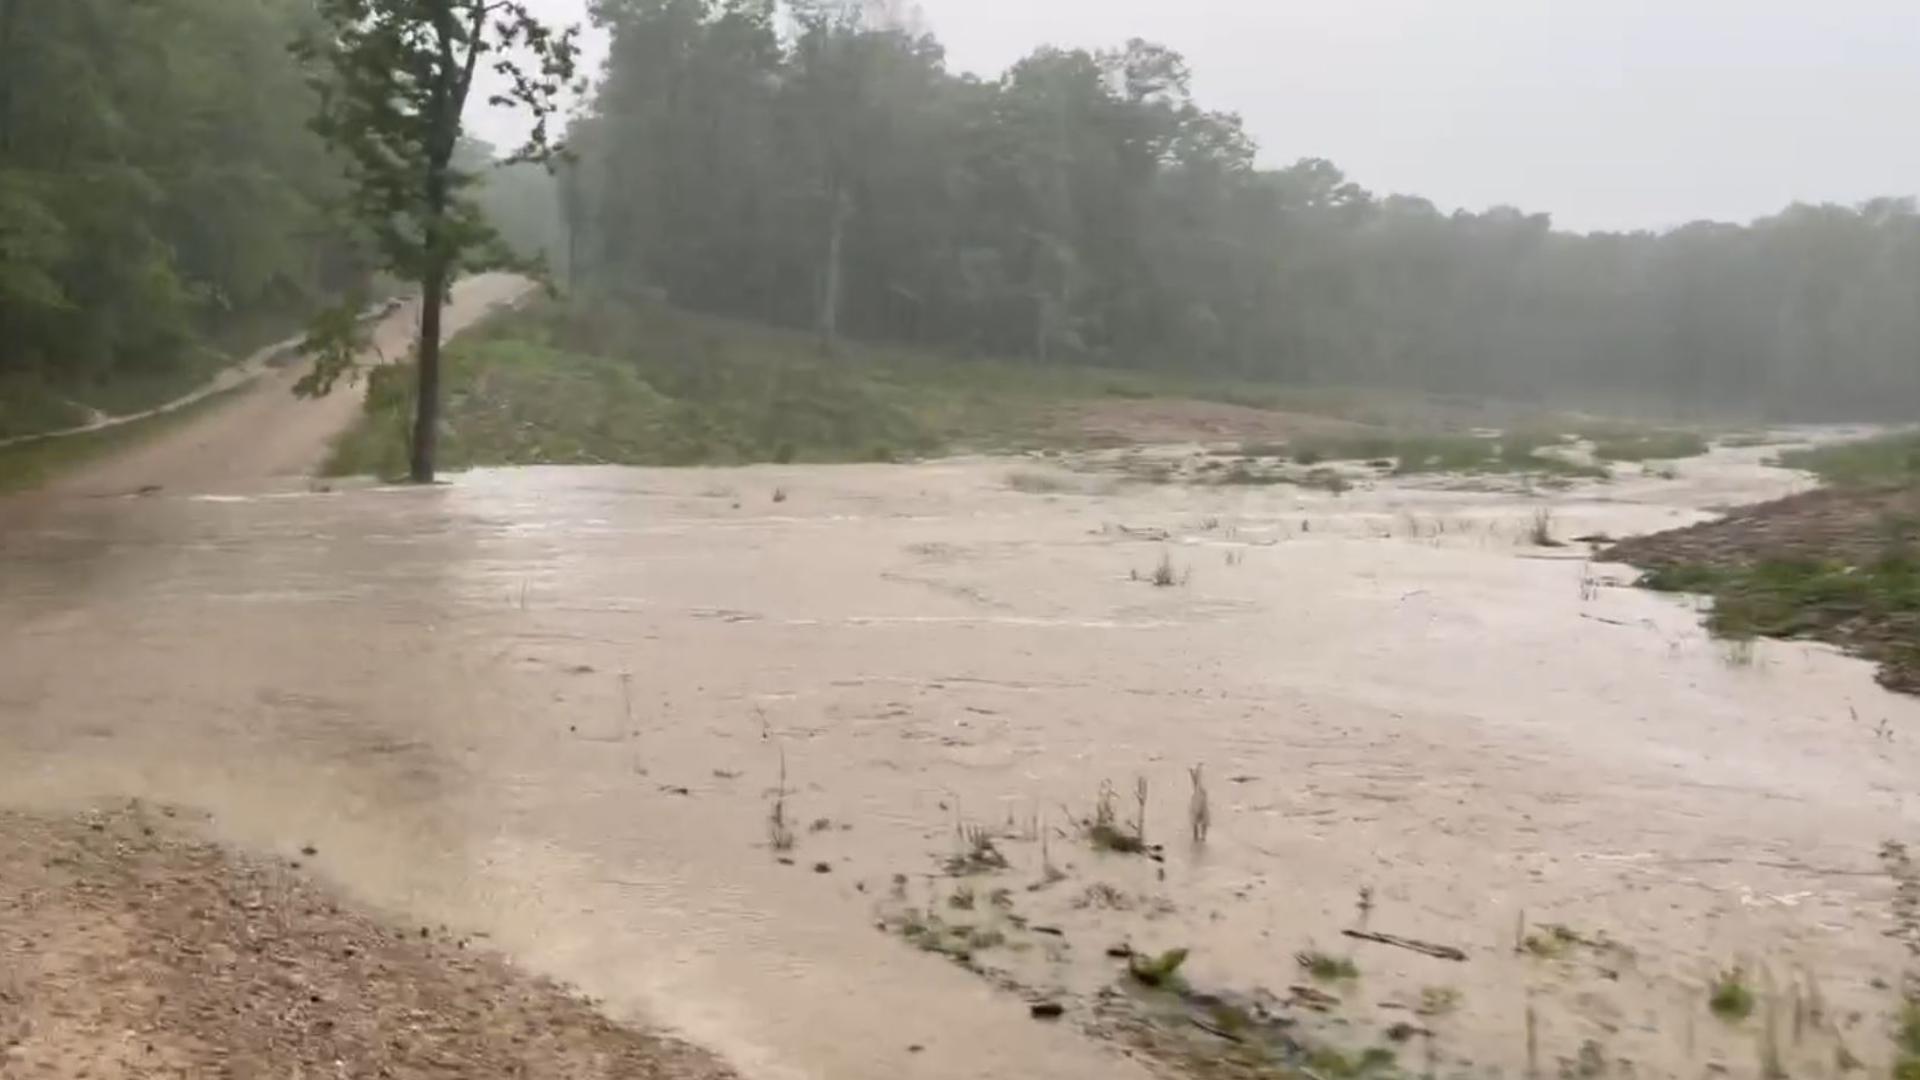 Severe weather moved through the St. Louis region on Wednesday. Video from Chad Belt shows flooding in the Sullivan, Missouri, area on back roads.